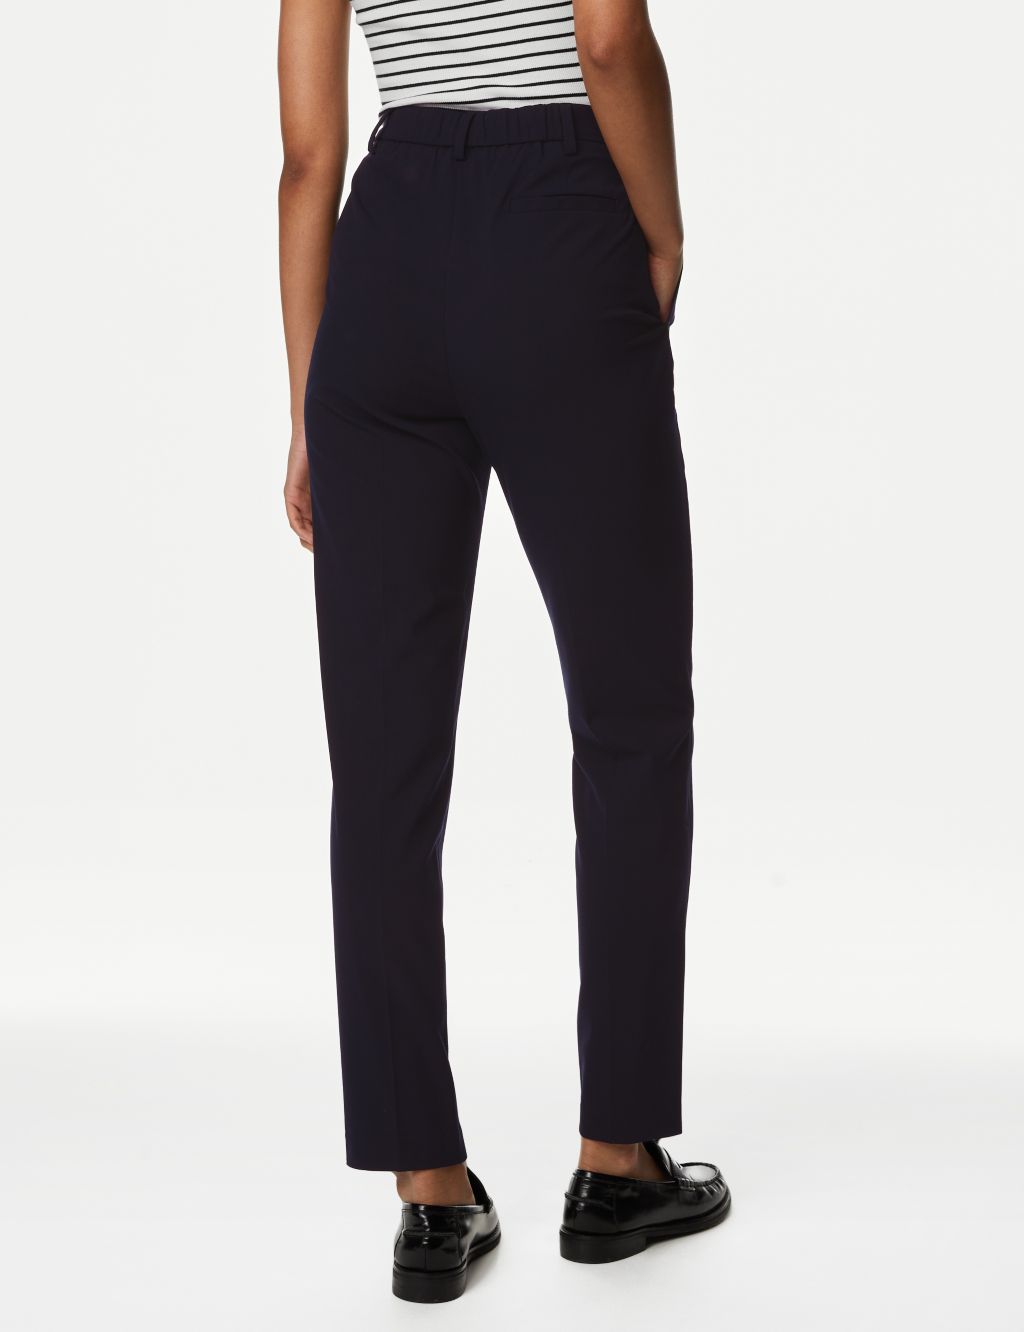 Slim Fit Ankle Grazer Trousers with Stretch image 4